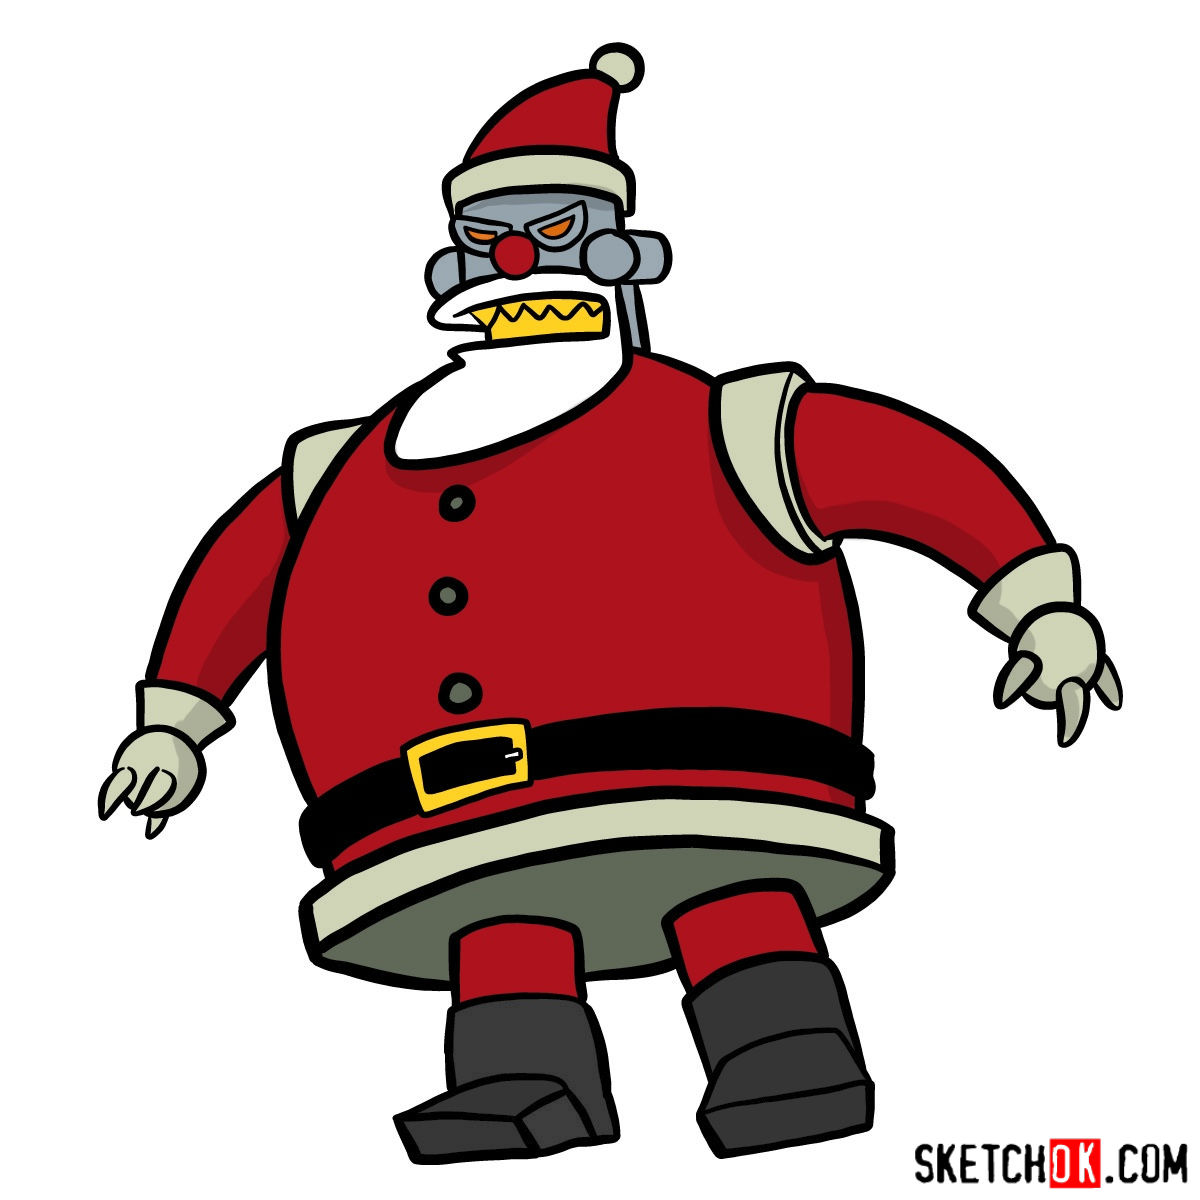 How to draw Robot Santa Claus